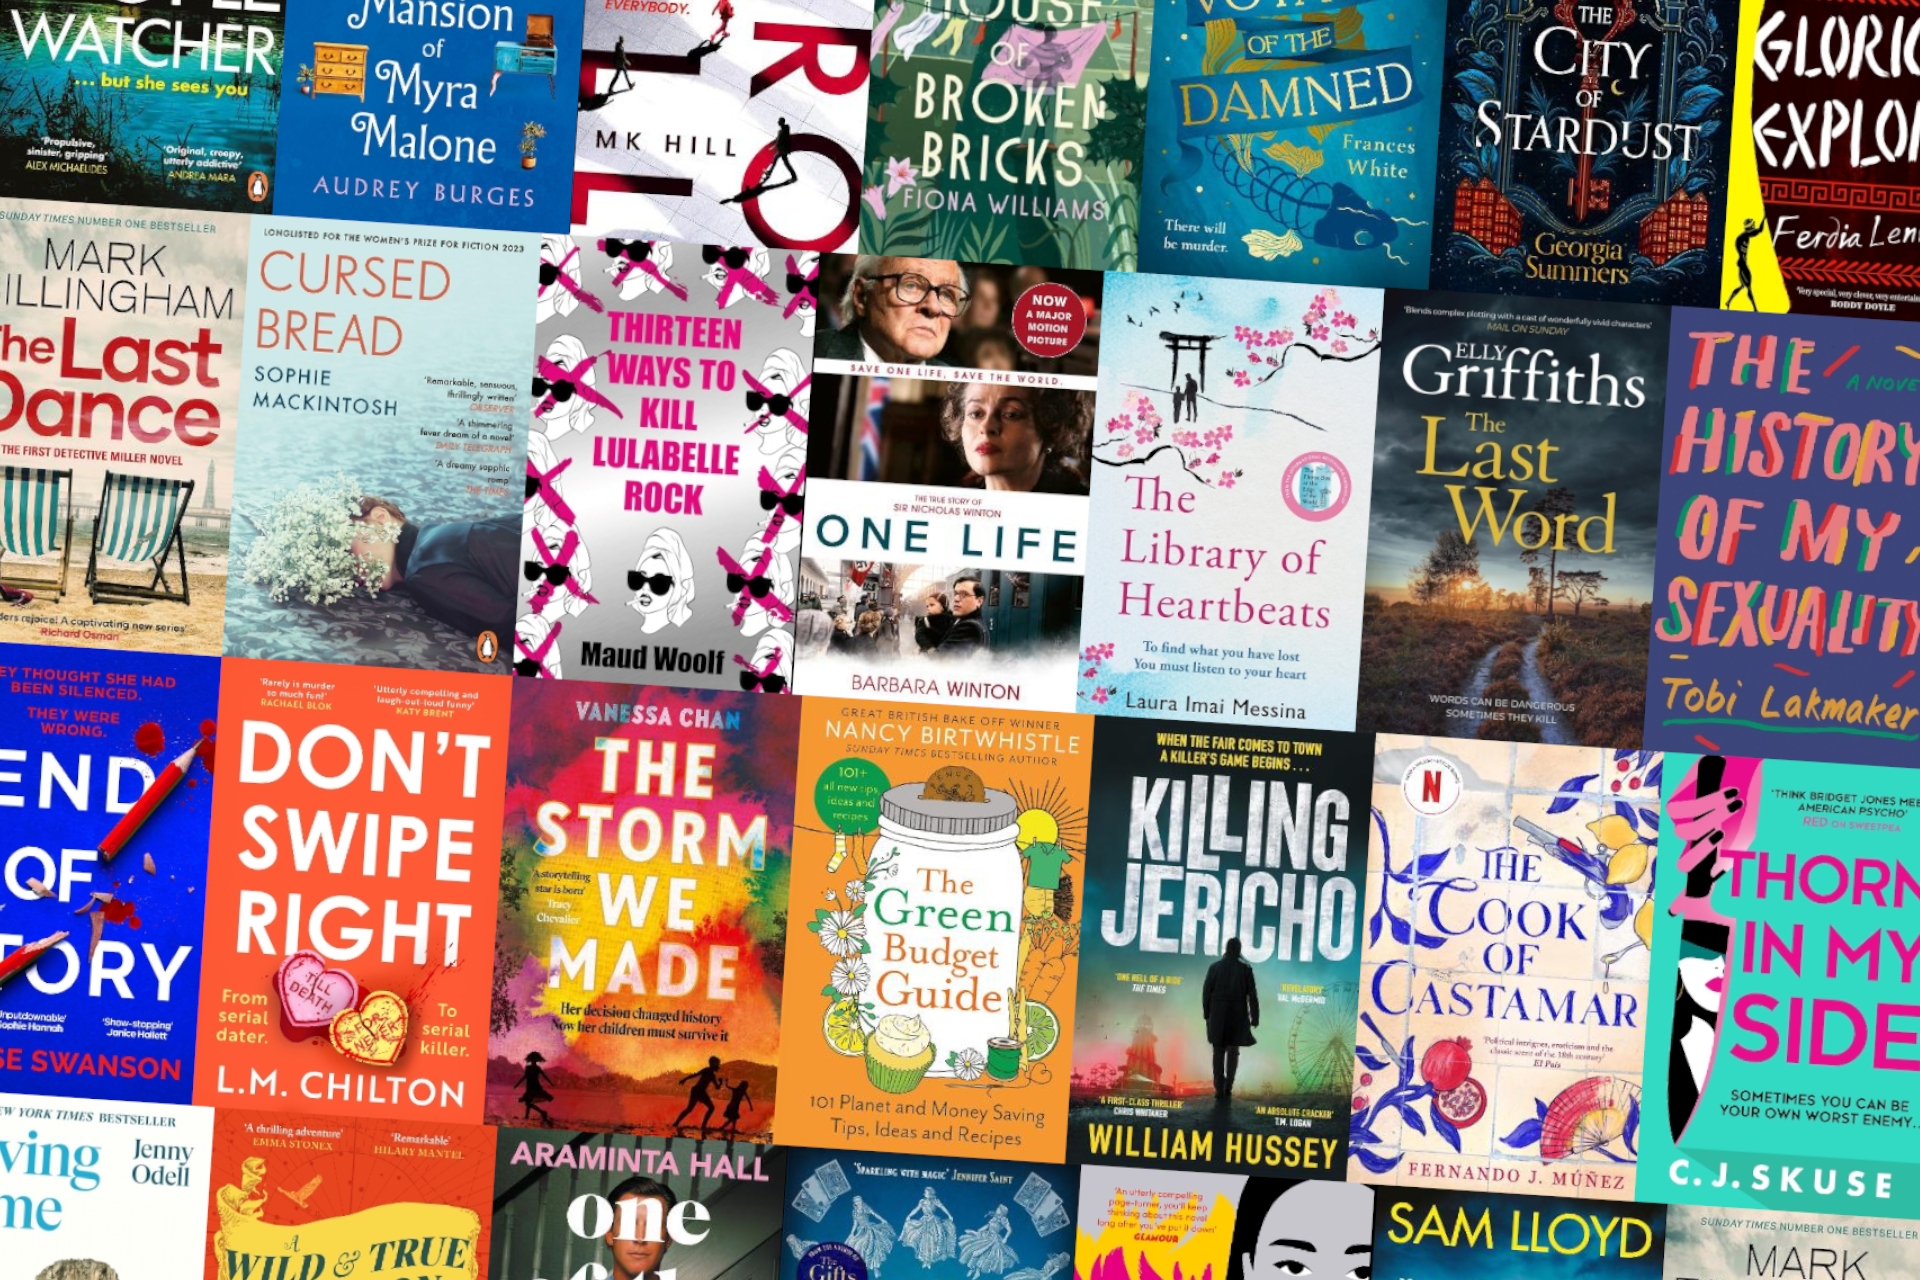 New Year, New Books - Take a Look at Our January Summary of Books and Start Your Year on a High